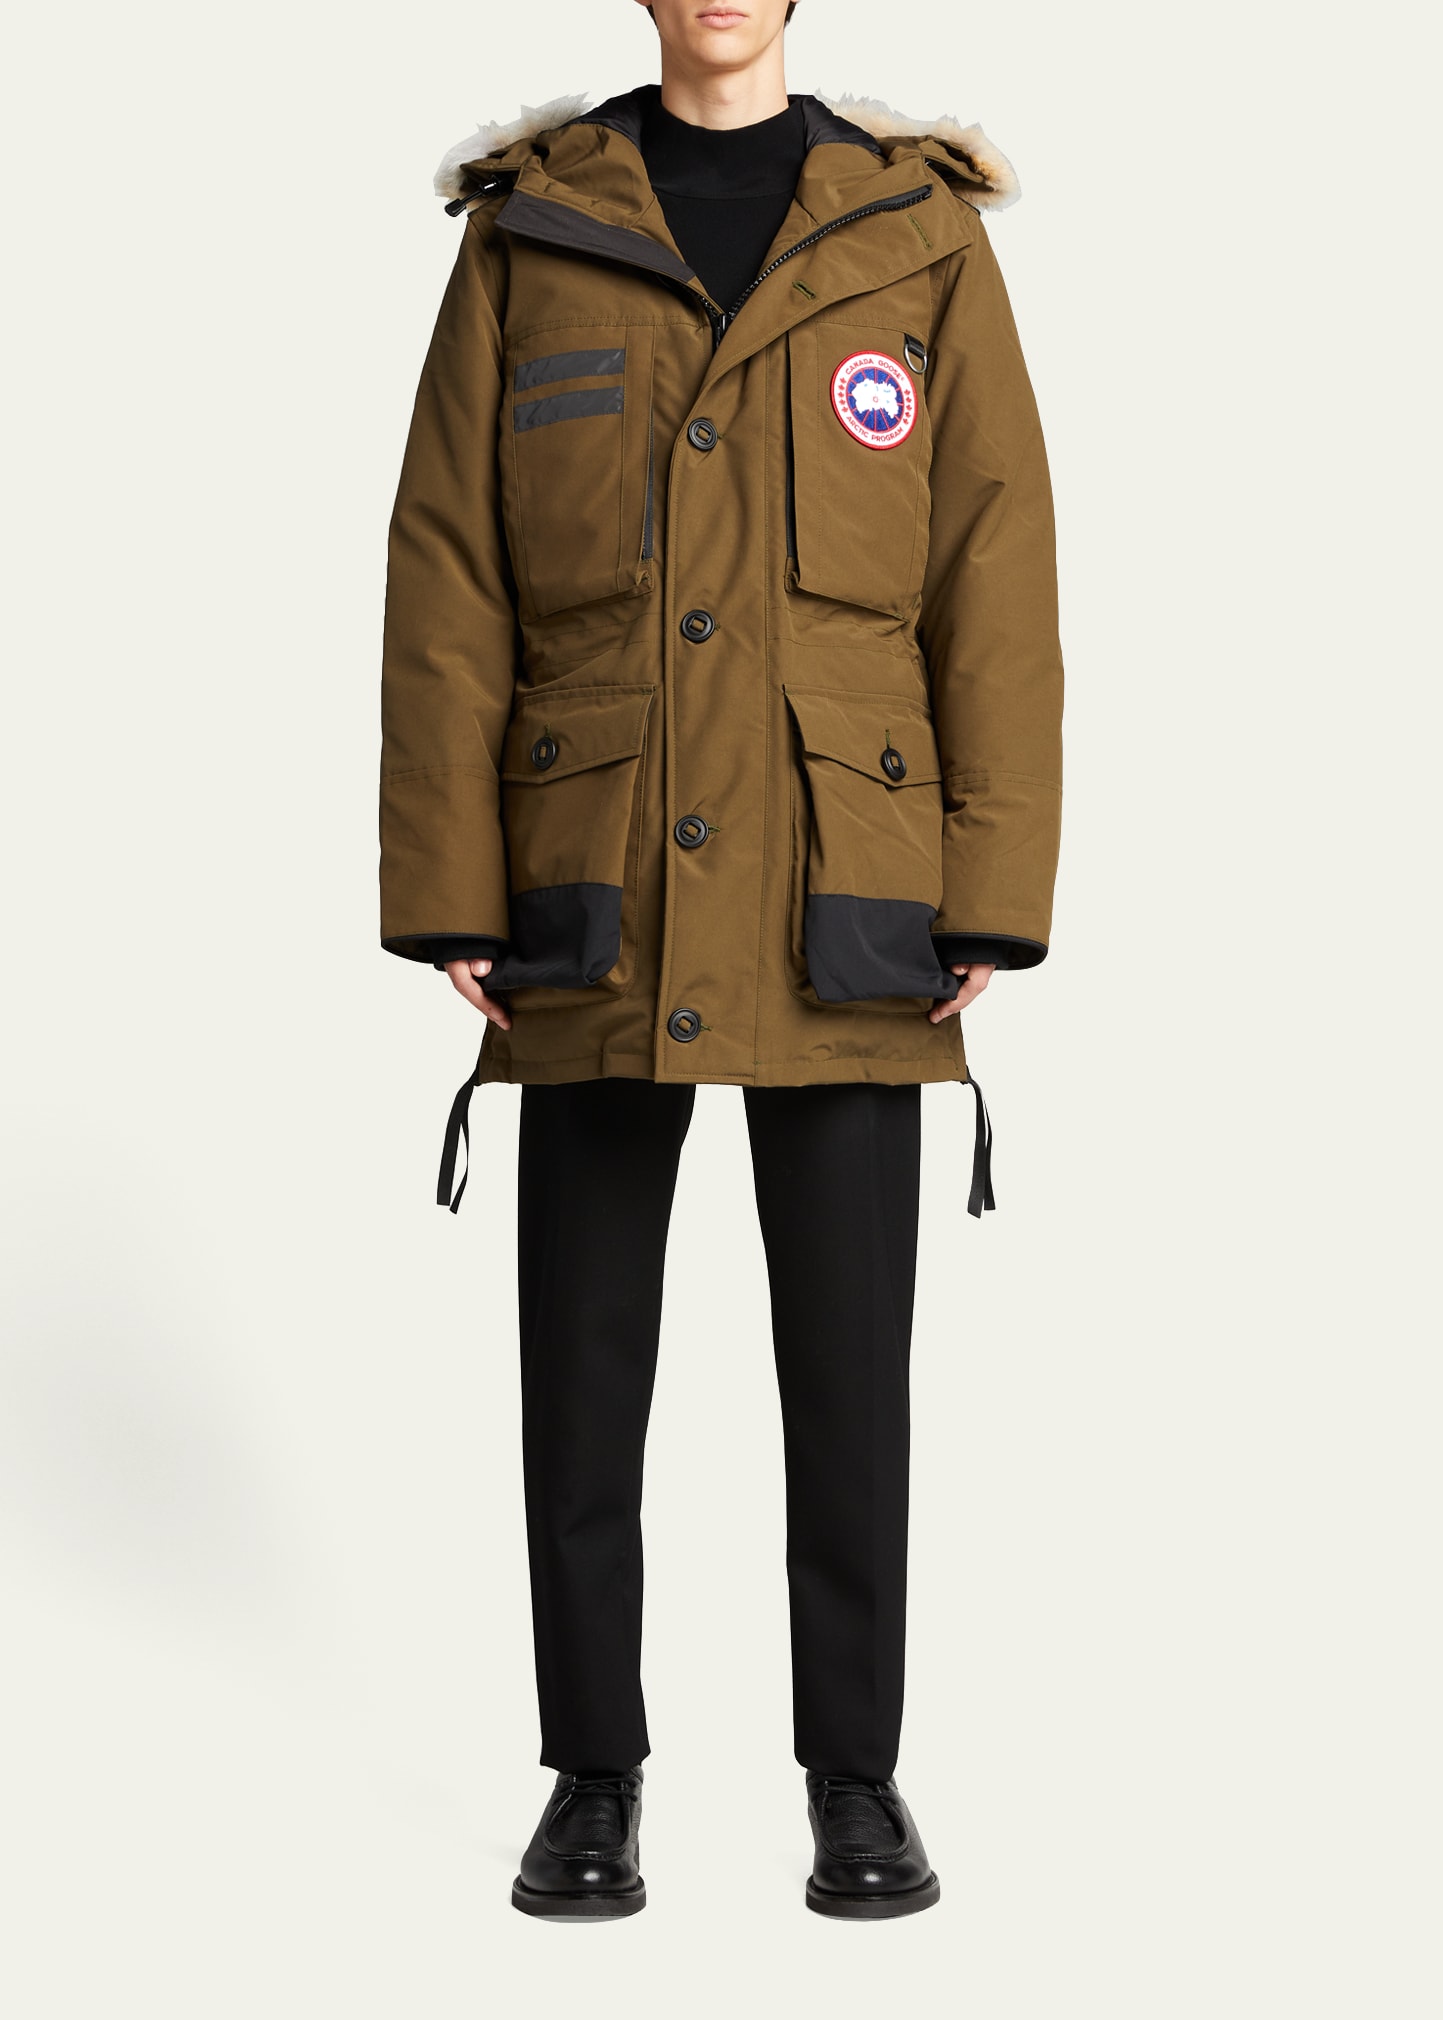 Canada Goose Chateau Arctic-Tech Parka with Fur Hood